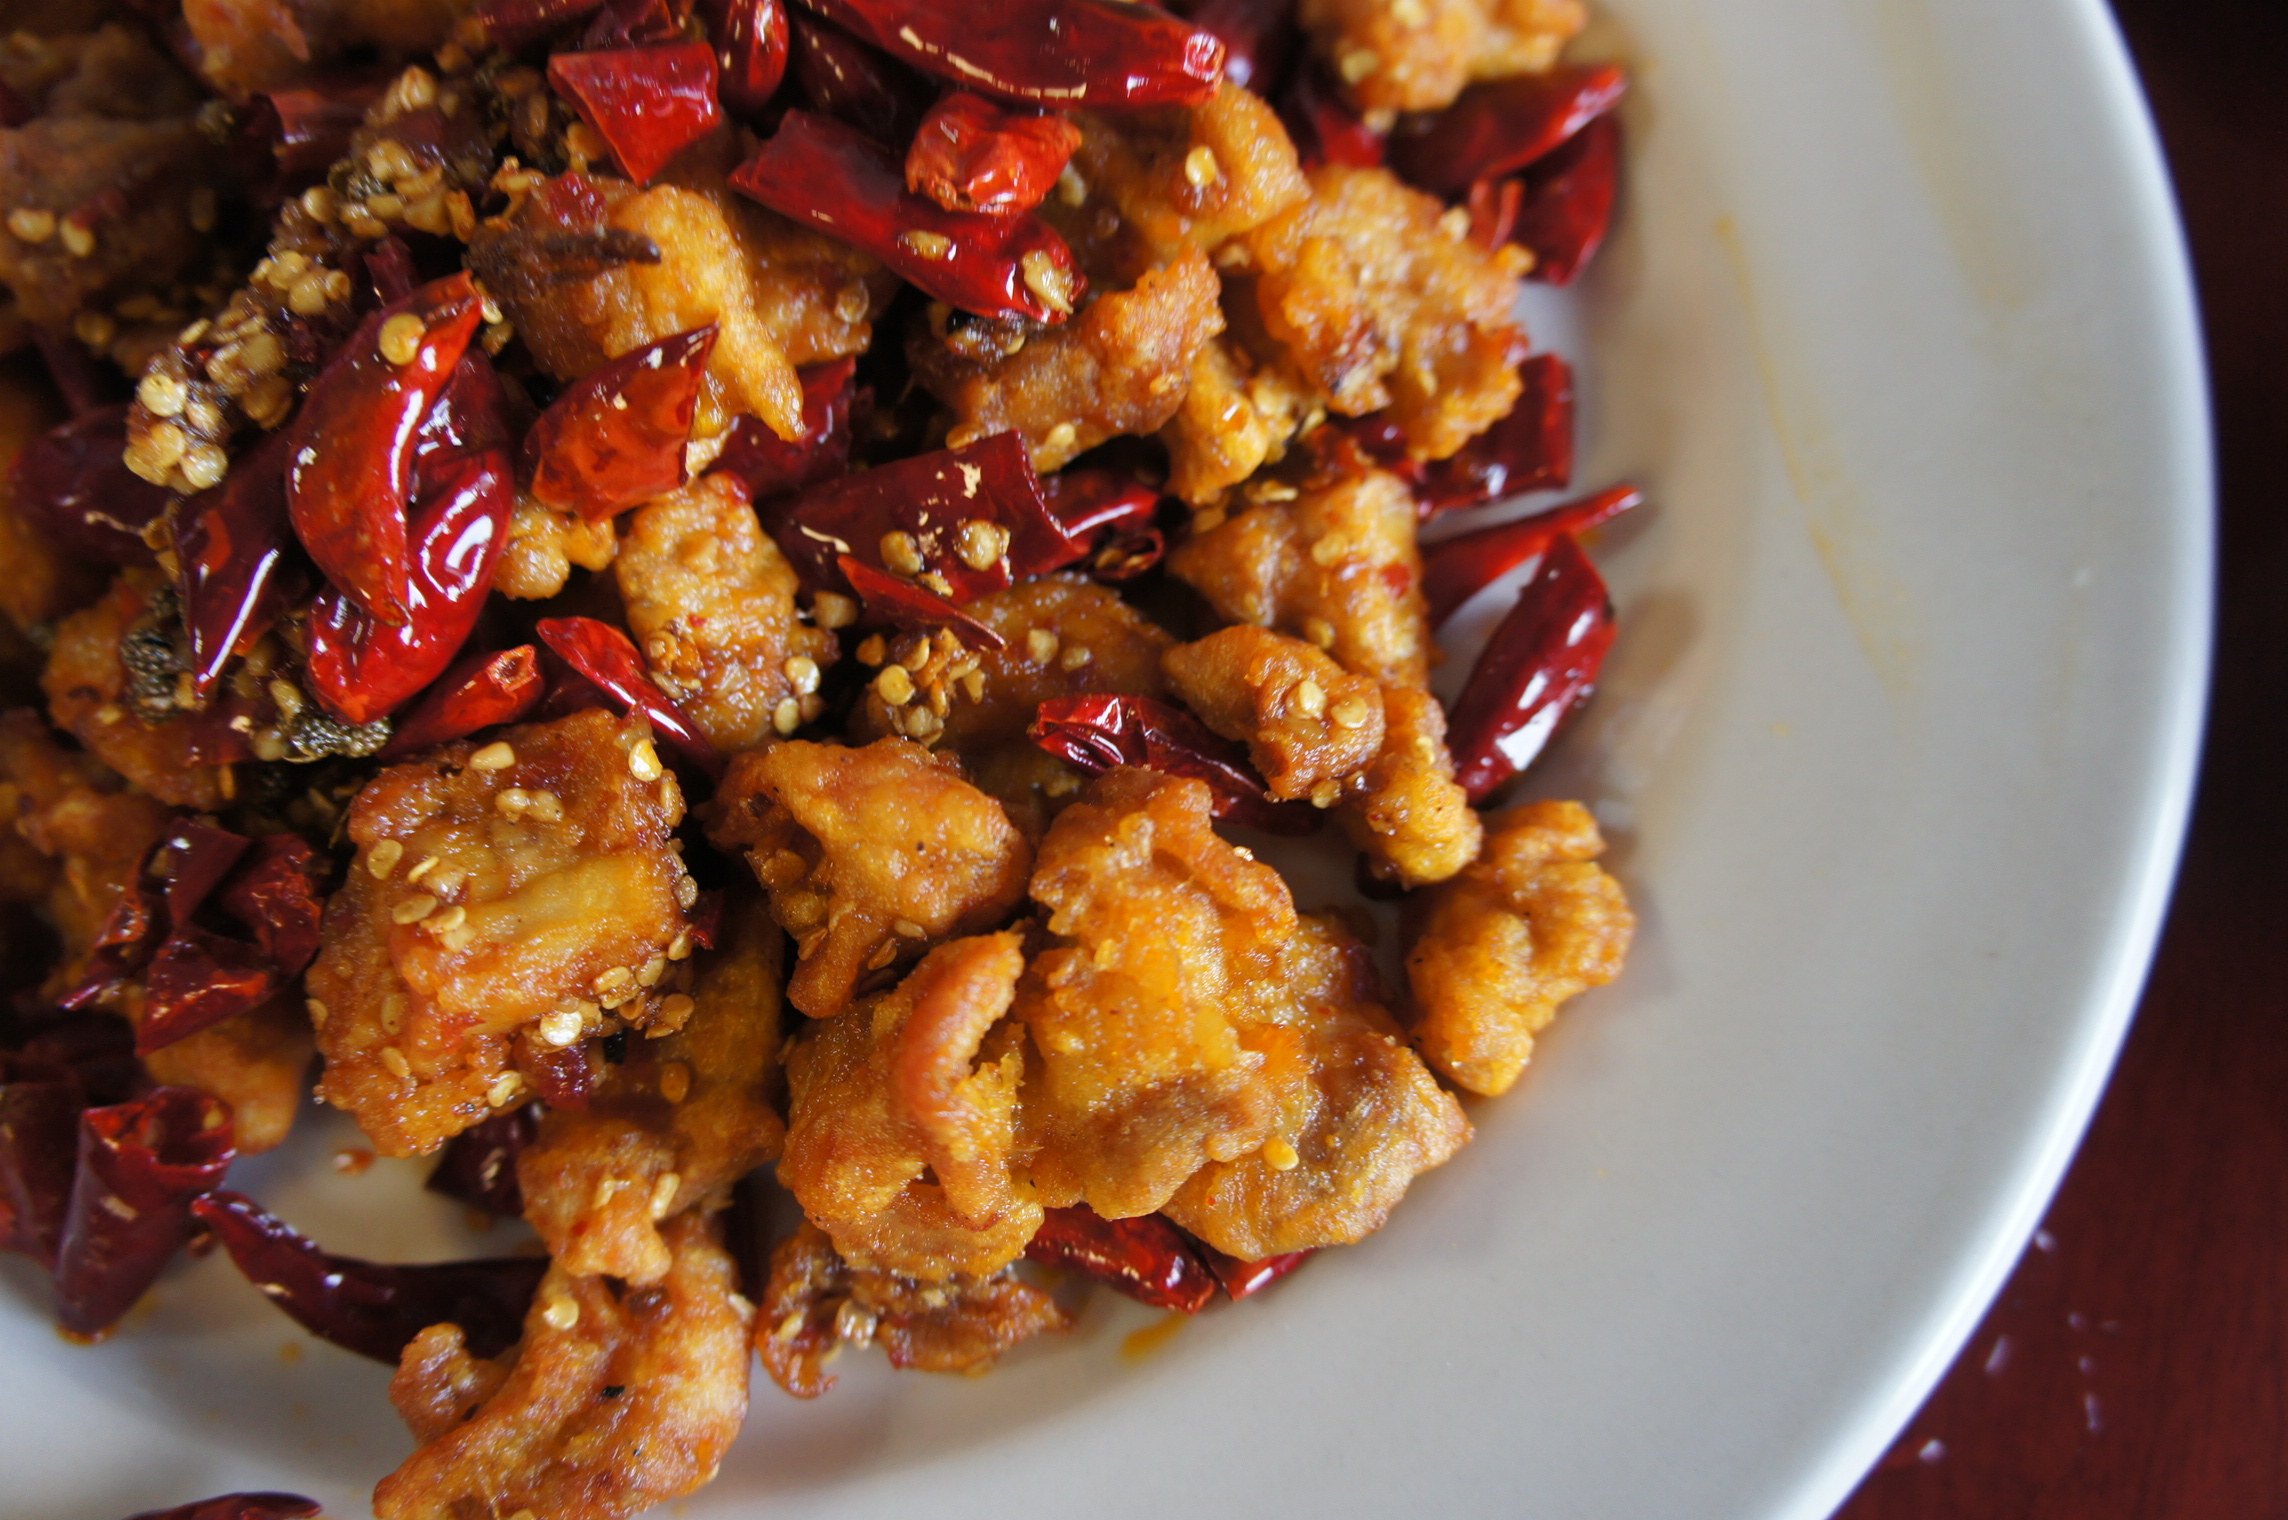 Chuan Lu Garden turns up the heat with real spicy Sichuan cuisine – Mills 50